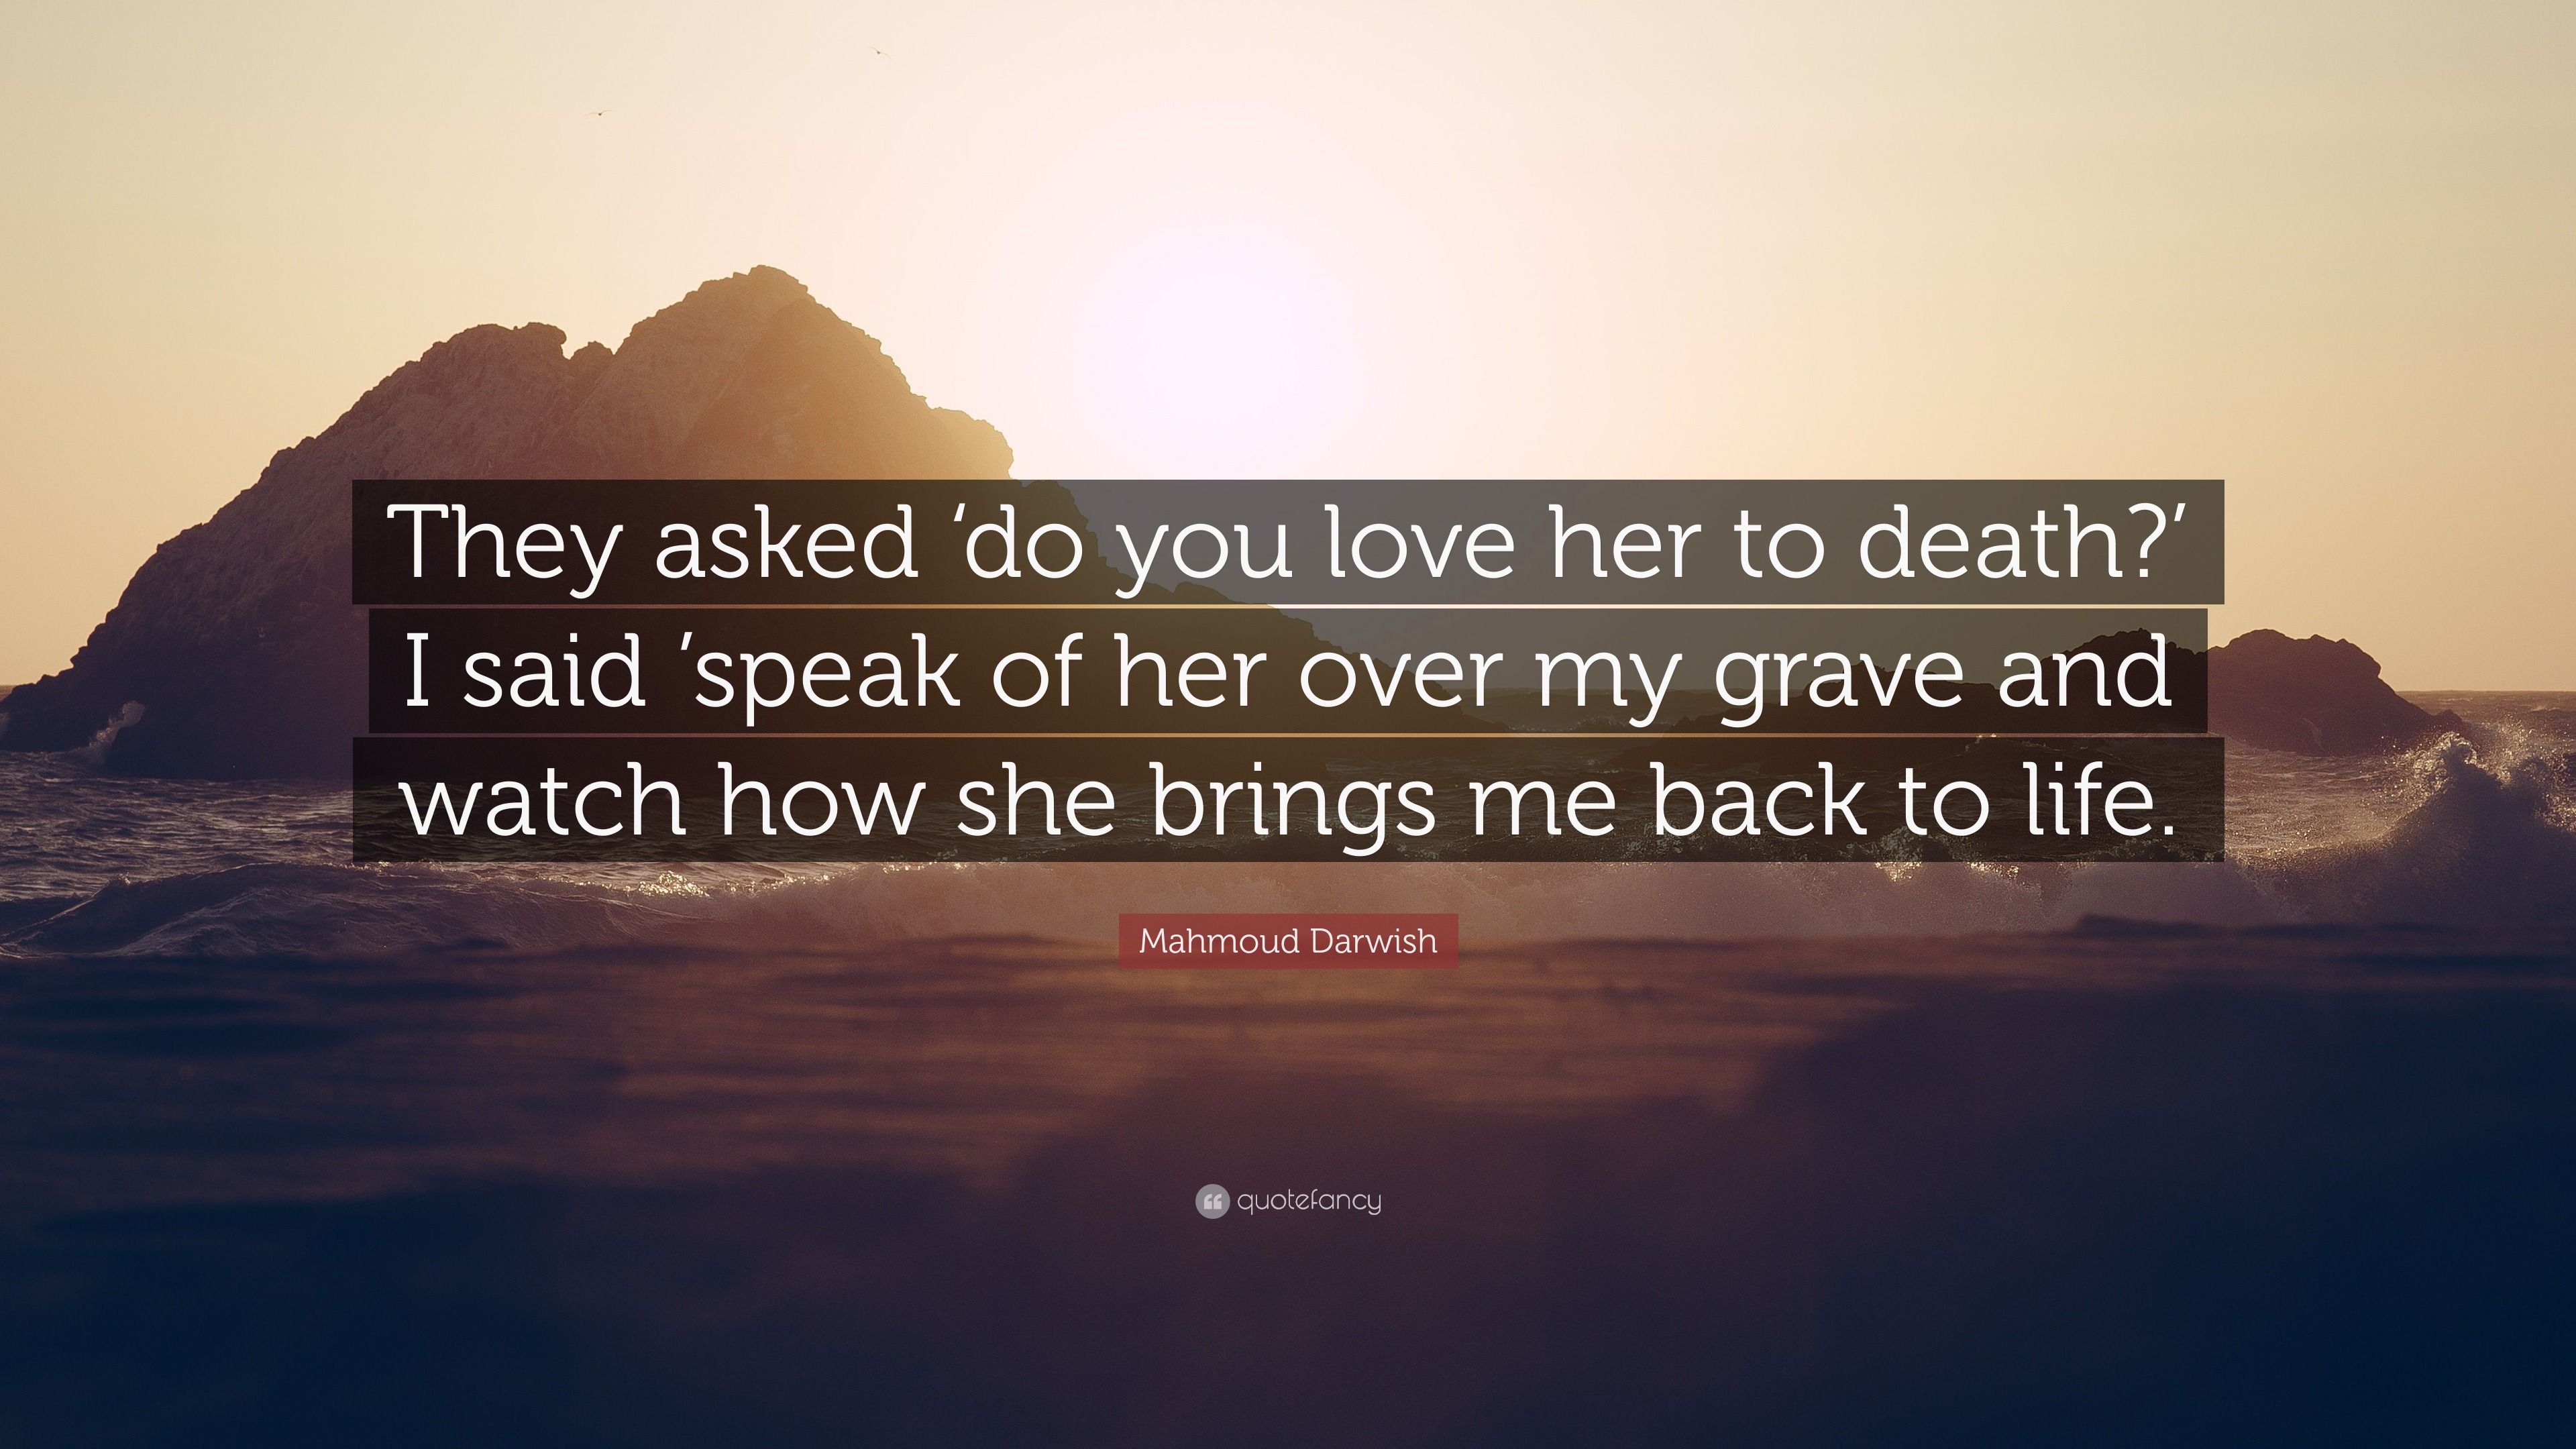 Mahmoud Darwish Quote: “They asked ‘do you love her to death?’ I said ...